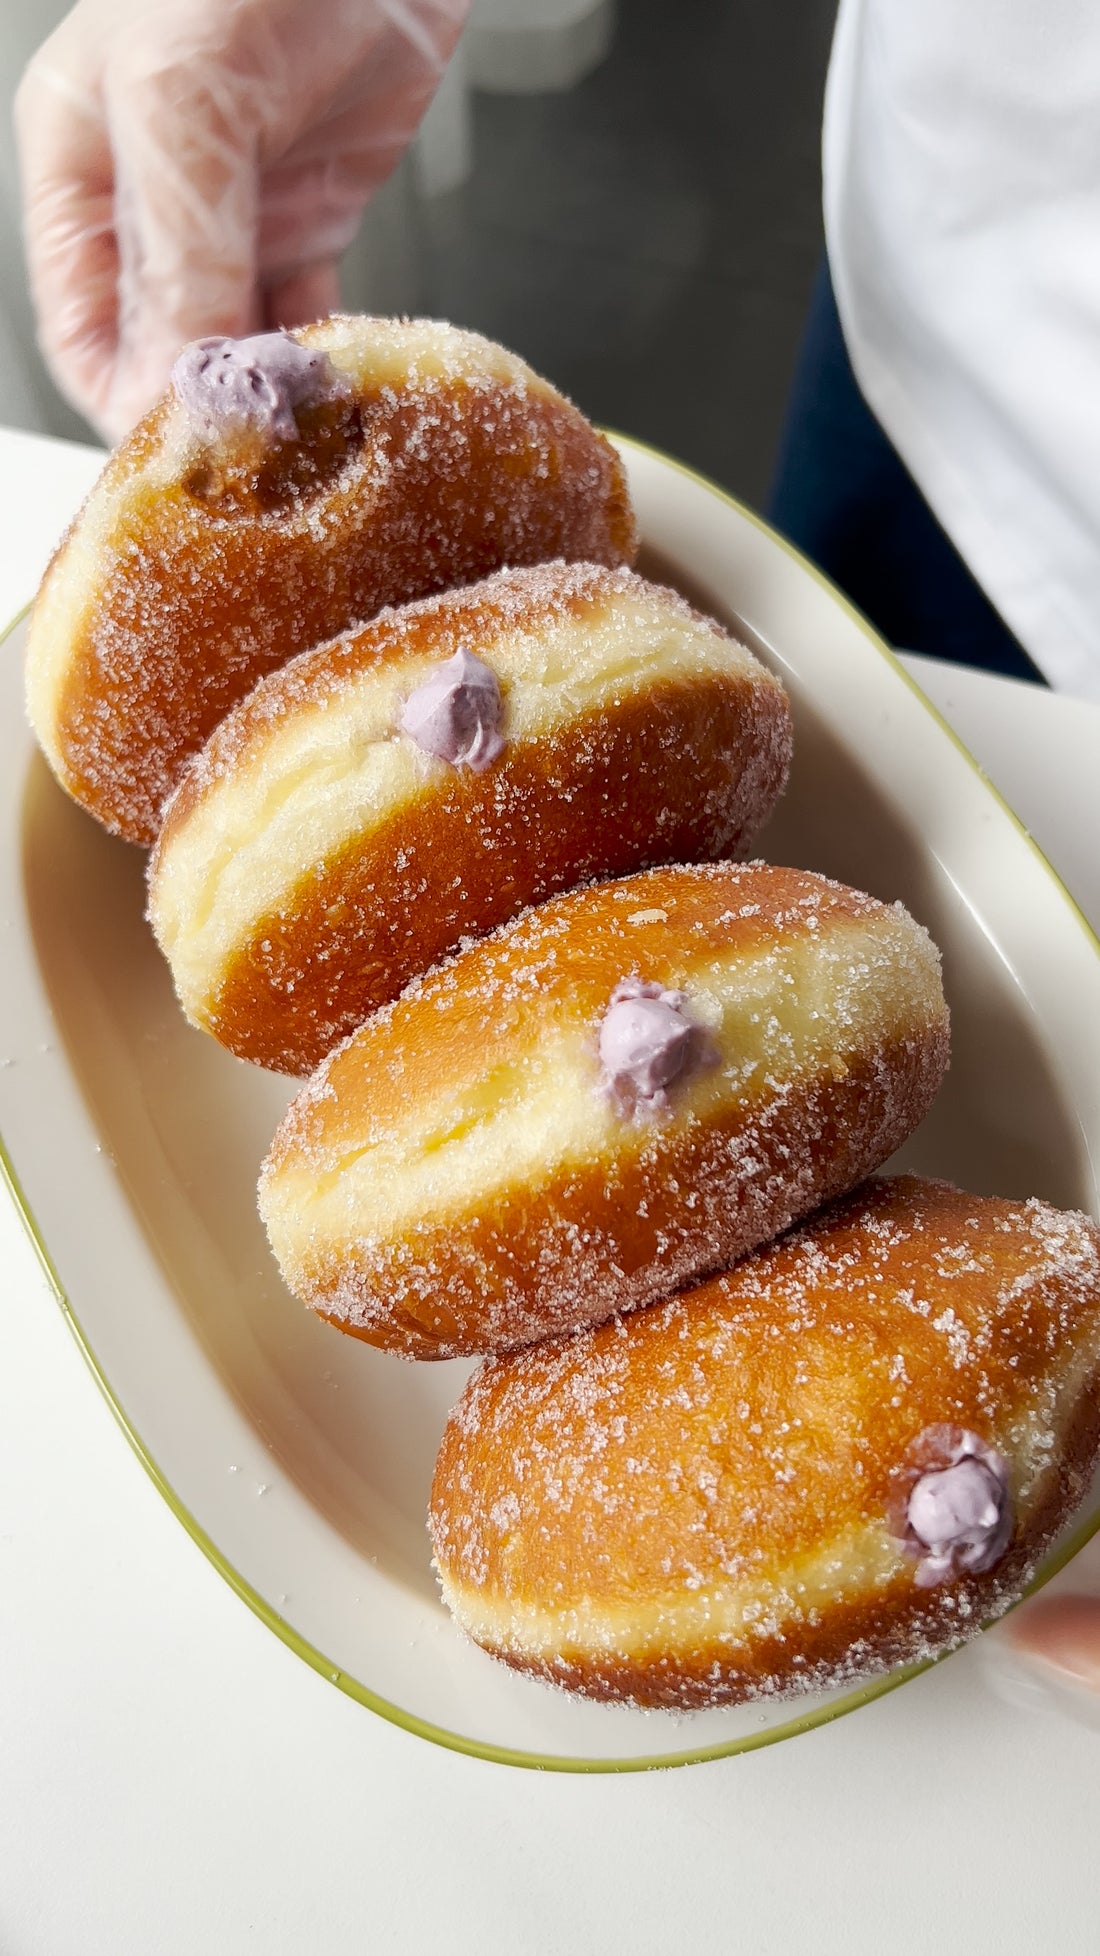 Fried Donuts with Homemade Blueberry Jam Filling